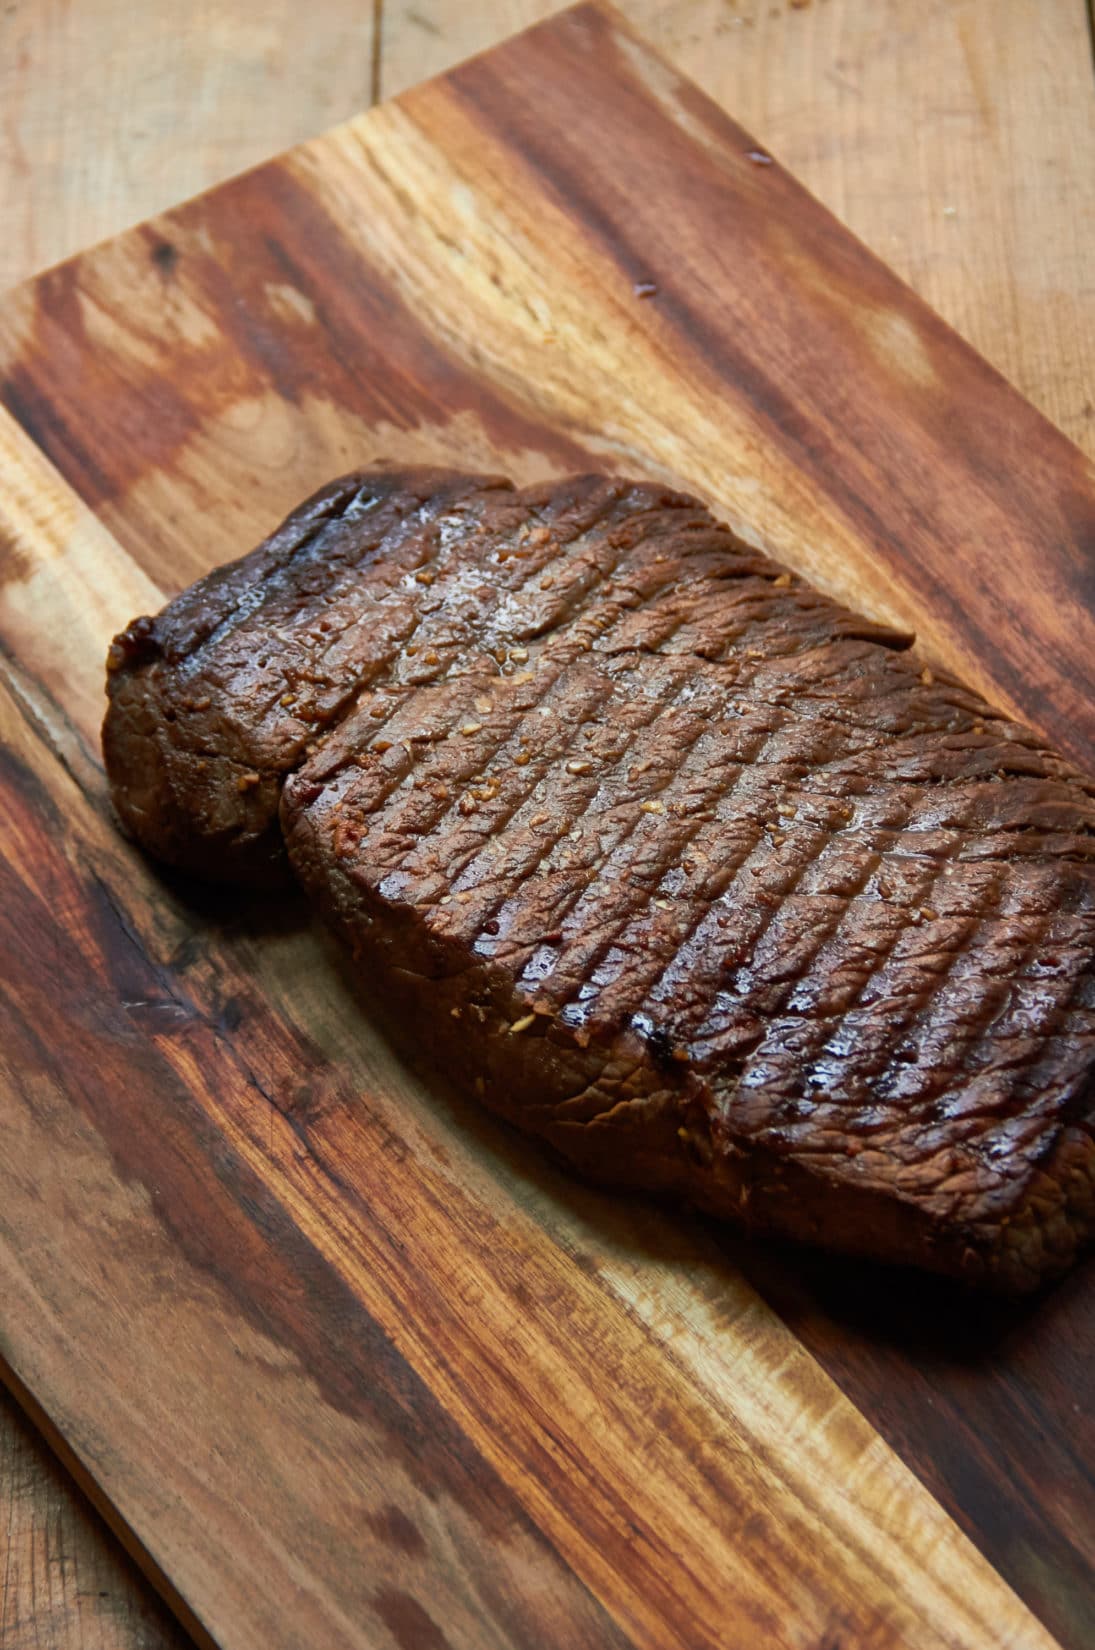 Grilled Marinated London Broil resting on a wooden surface.